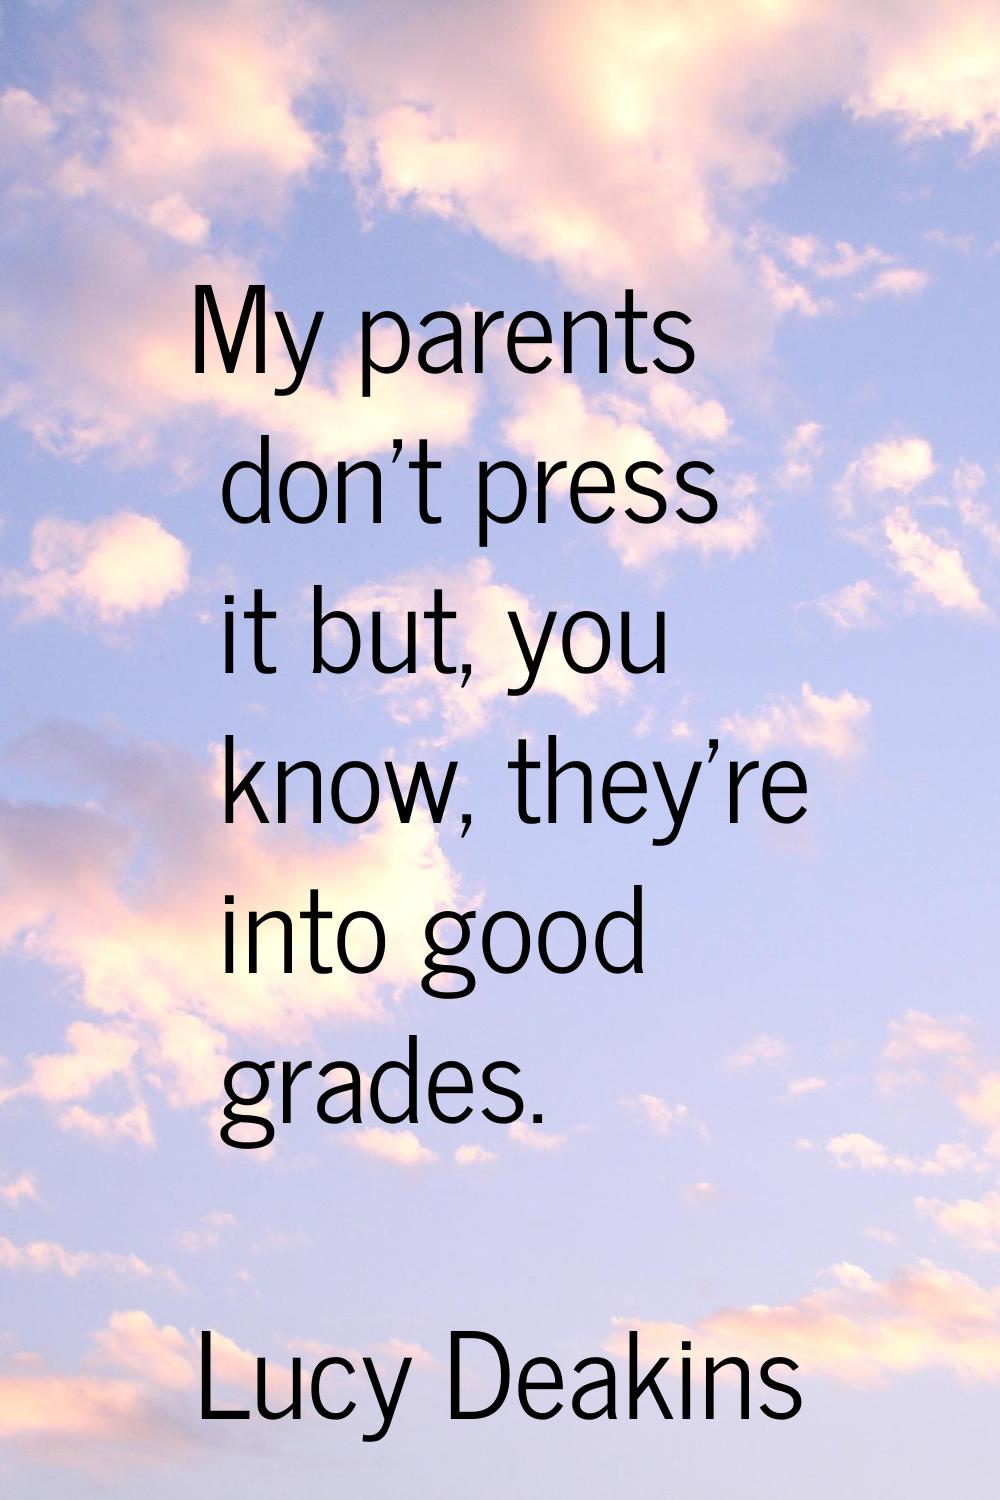 My parents don't press it but, you know, they're into good grades.